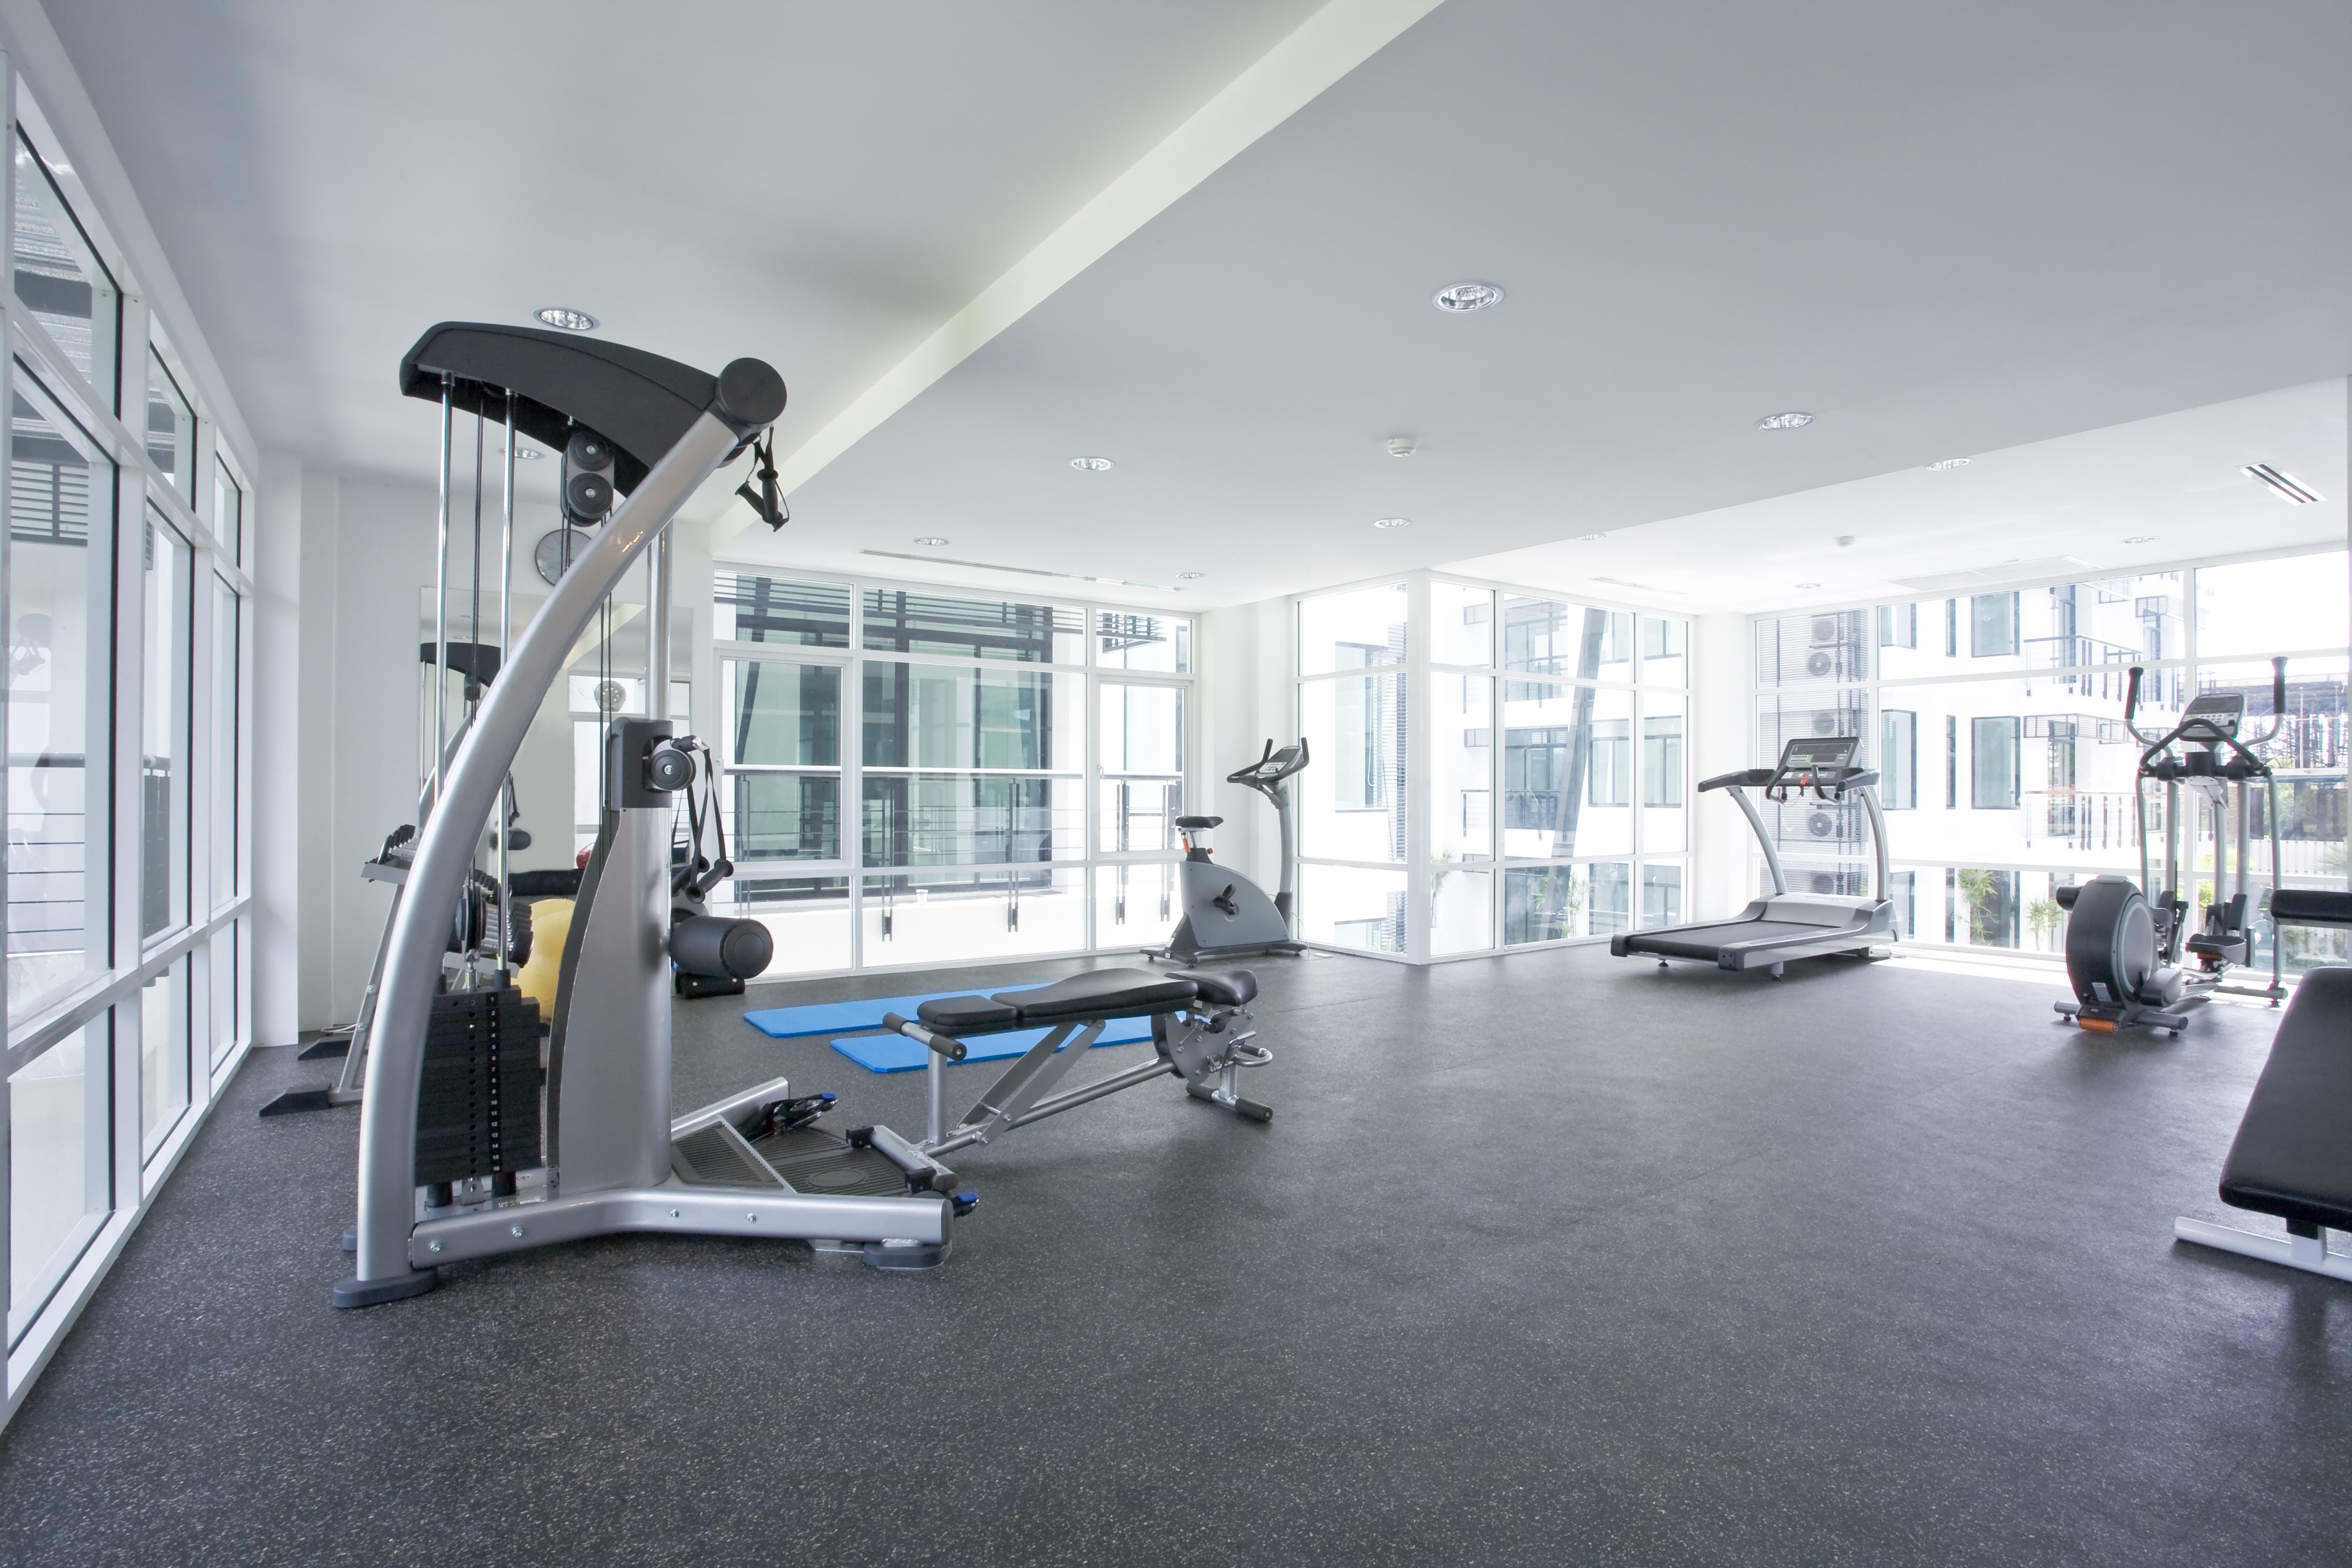 The 10 Location Considerations When Deciding How to Open a Gym